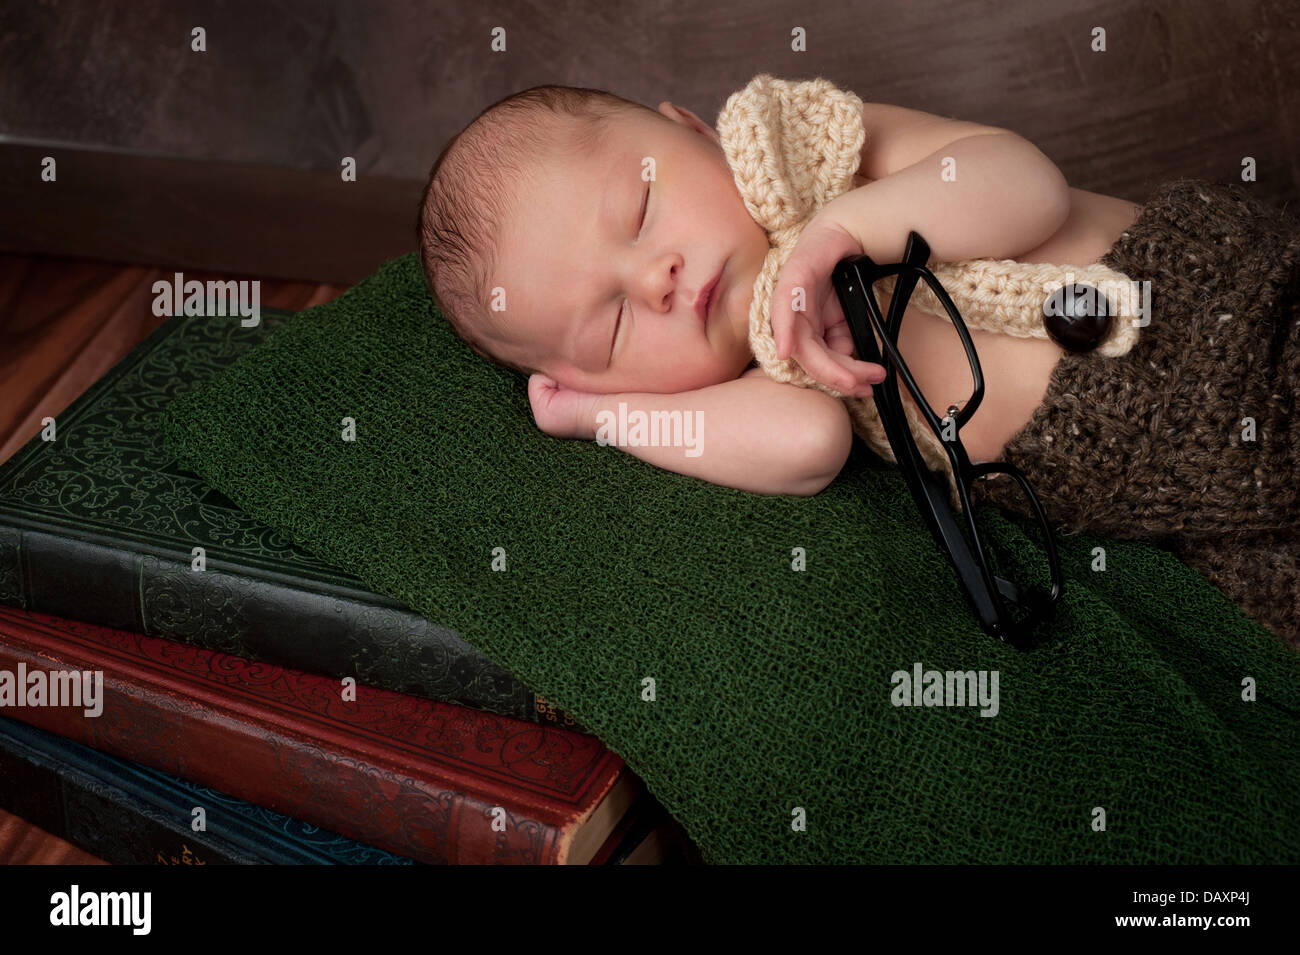 Newborn Baby Boy with Books and Reading Glasses Stock Photo